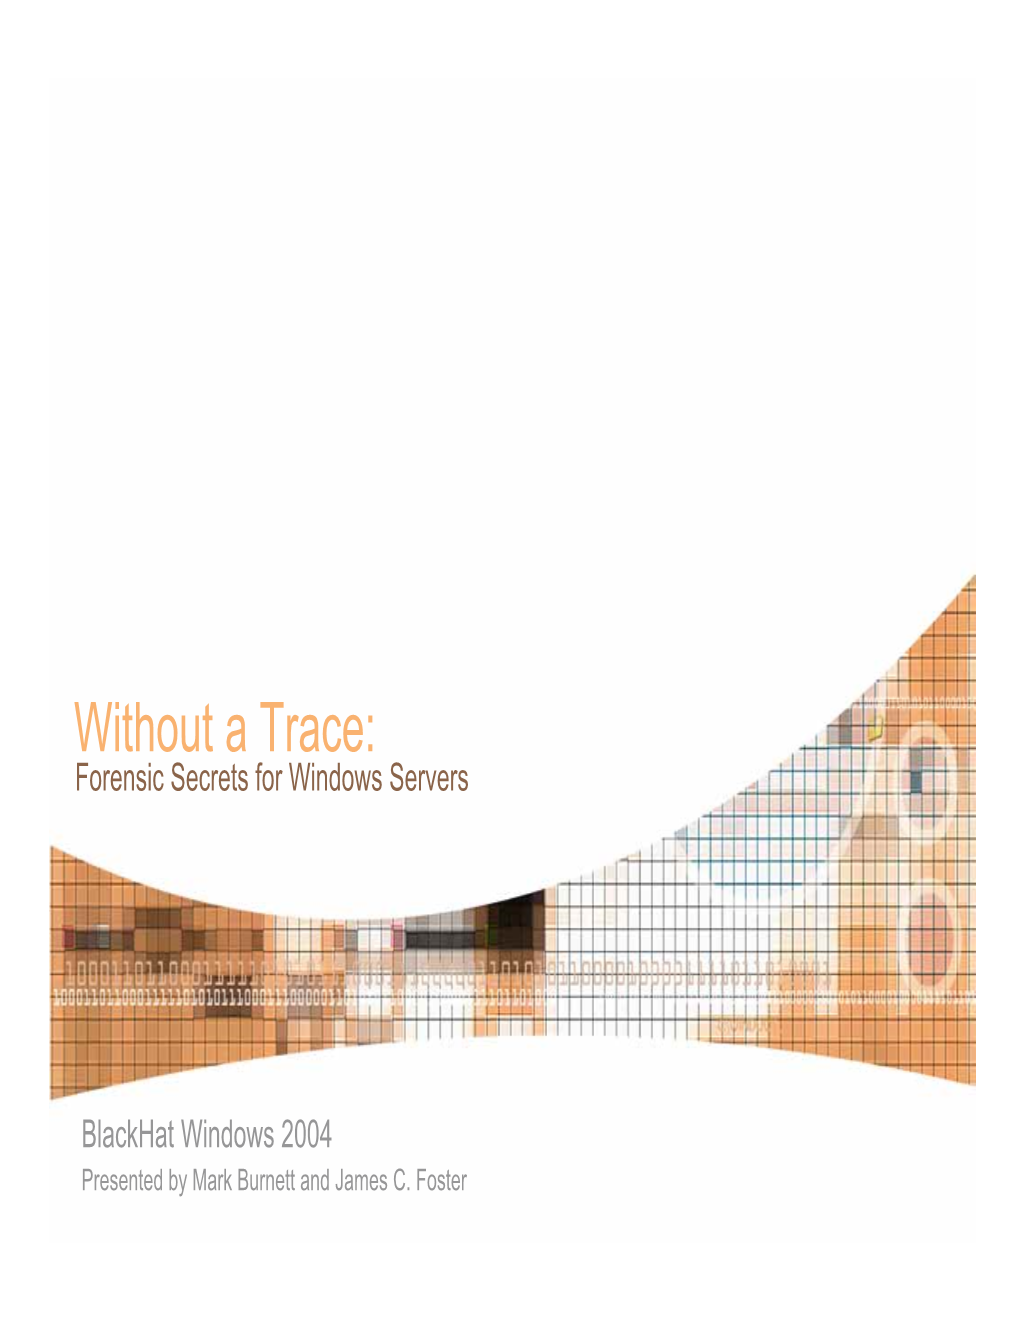 Without a Trace: Forensic Secrets for Windows Servers